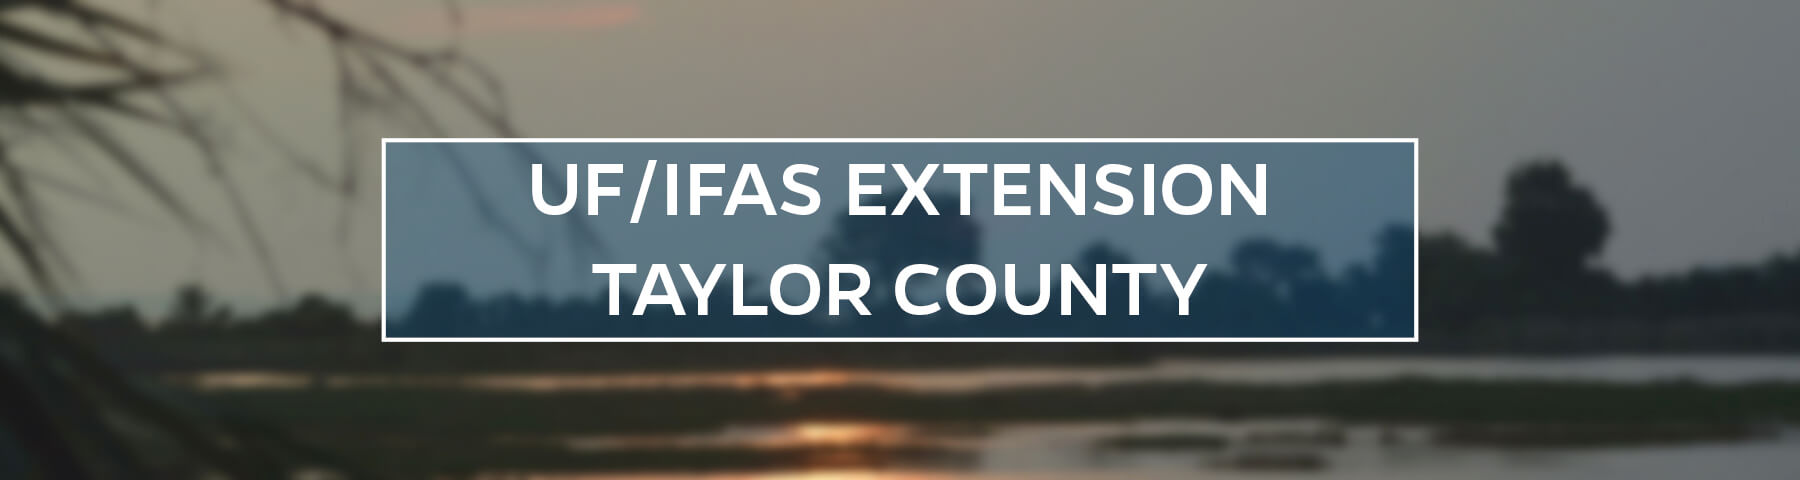 UF/IFAS Extension Taylor County